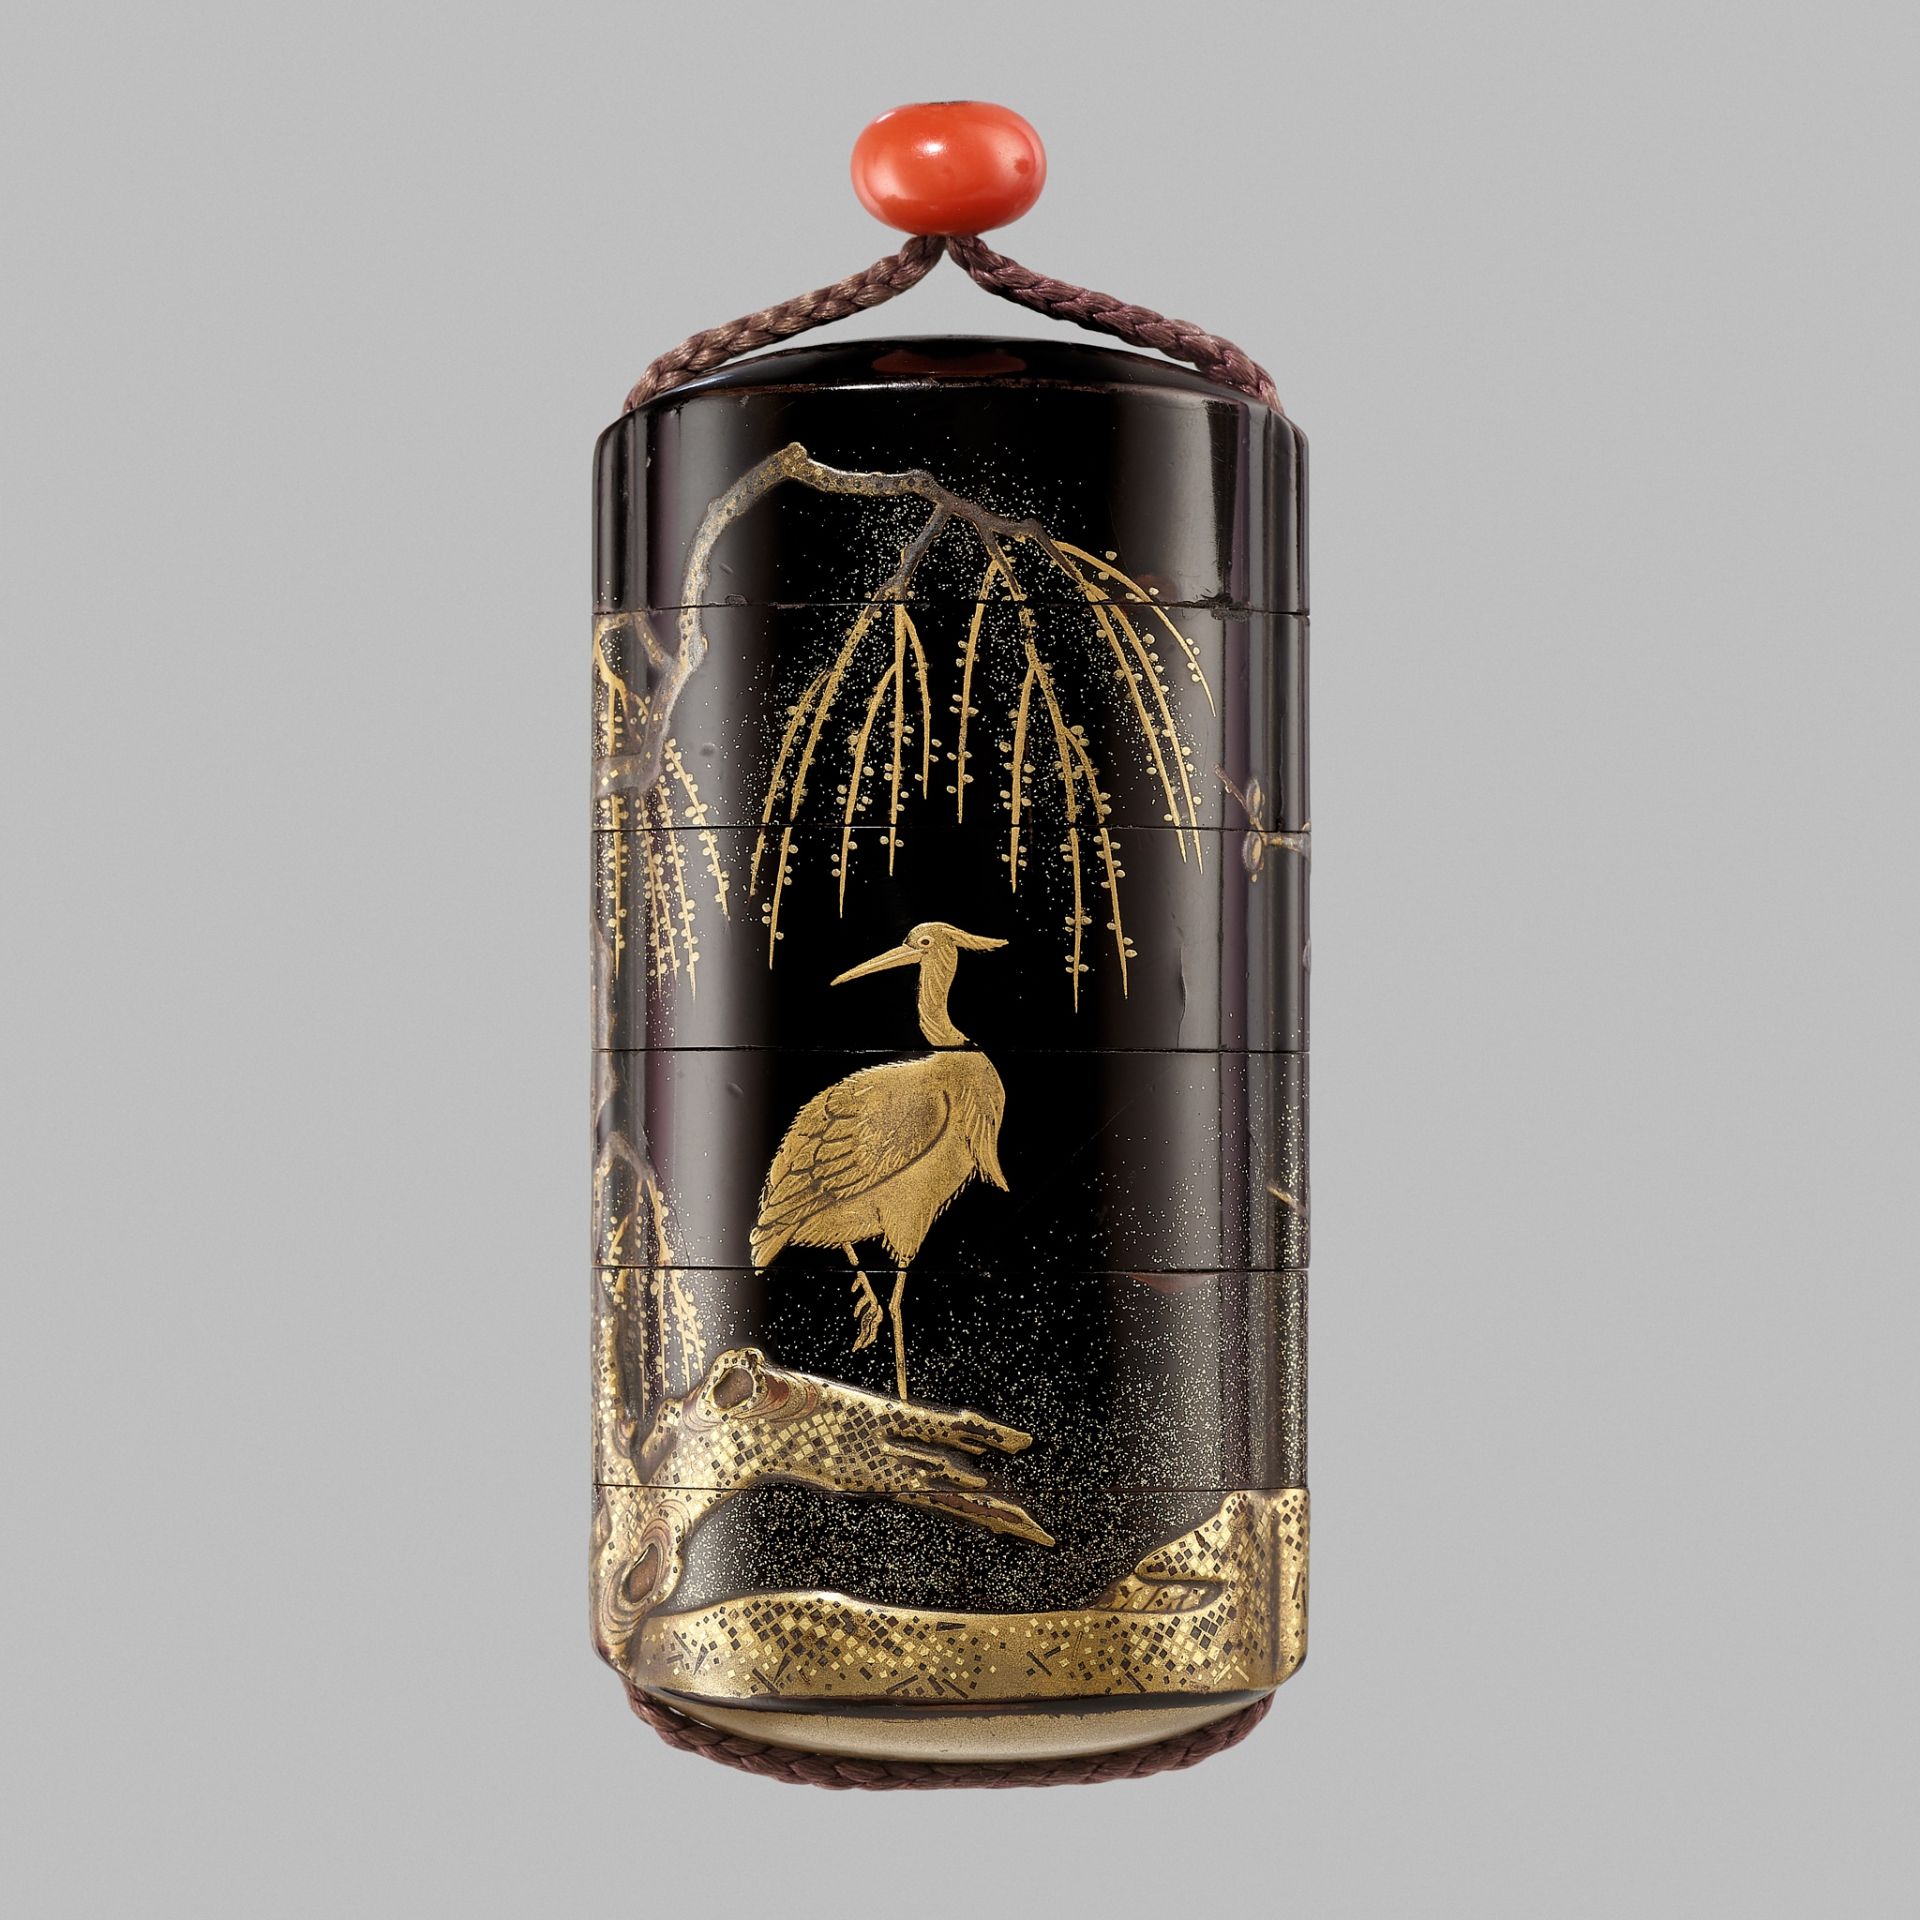 A FIVE-CASE LACQUER INRO DEPICTING A CHARMING WINTER SCENE